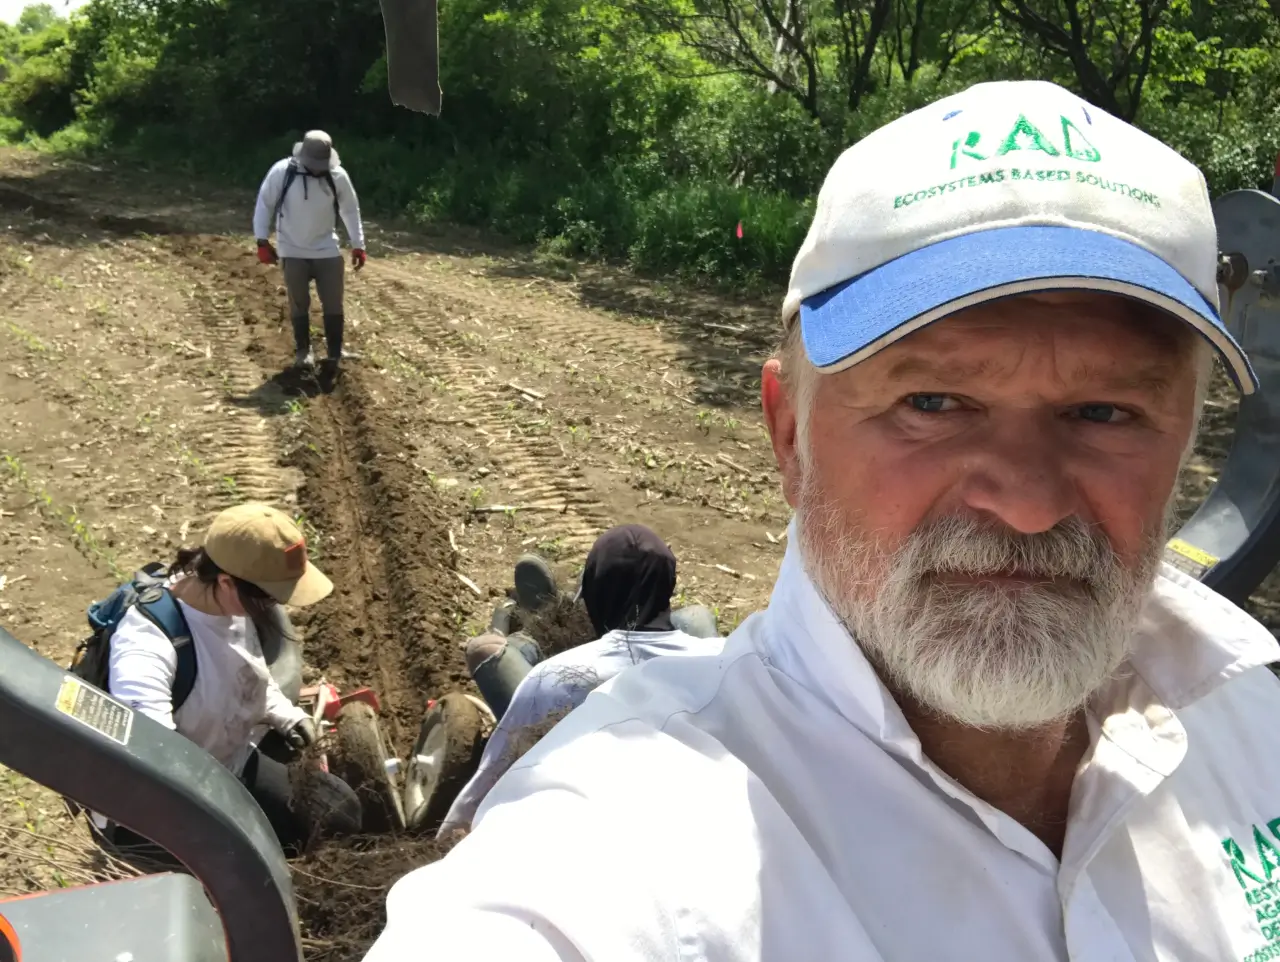 Meet the Midwestern Farmer Restoring the Land by Growing Native Plants